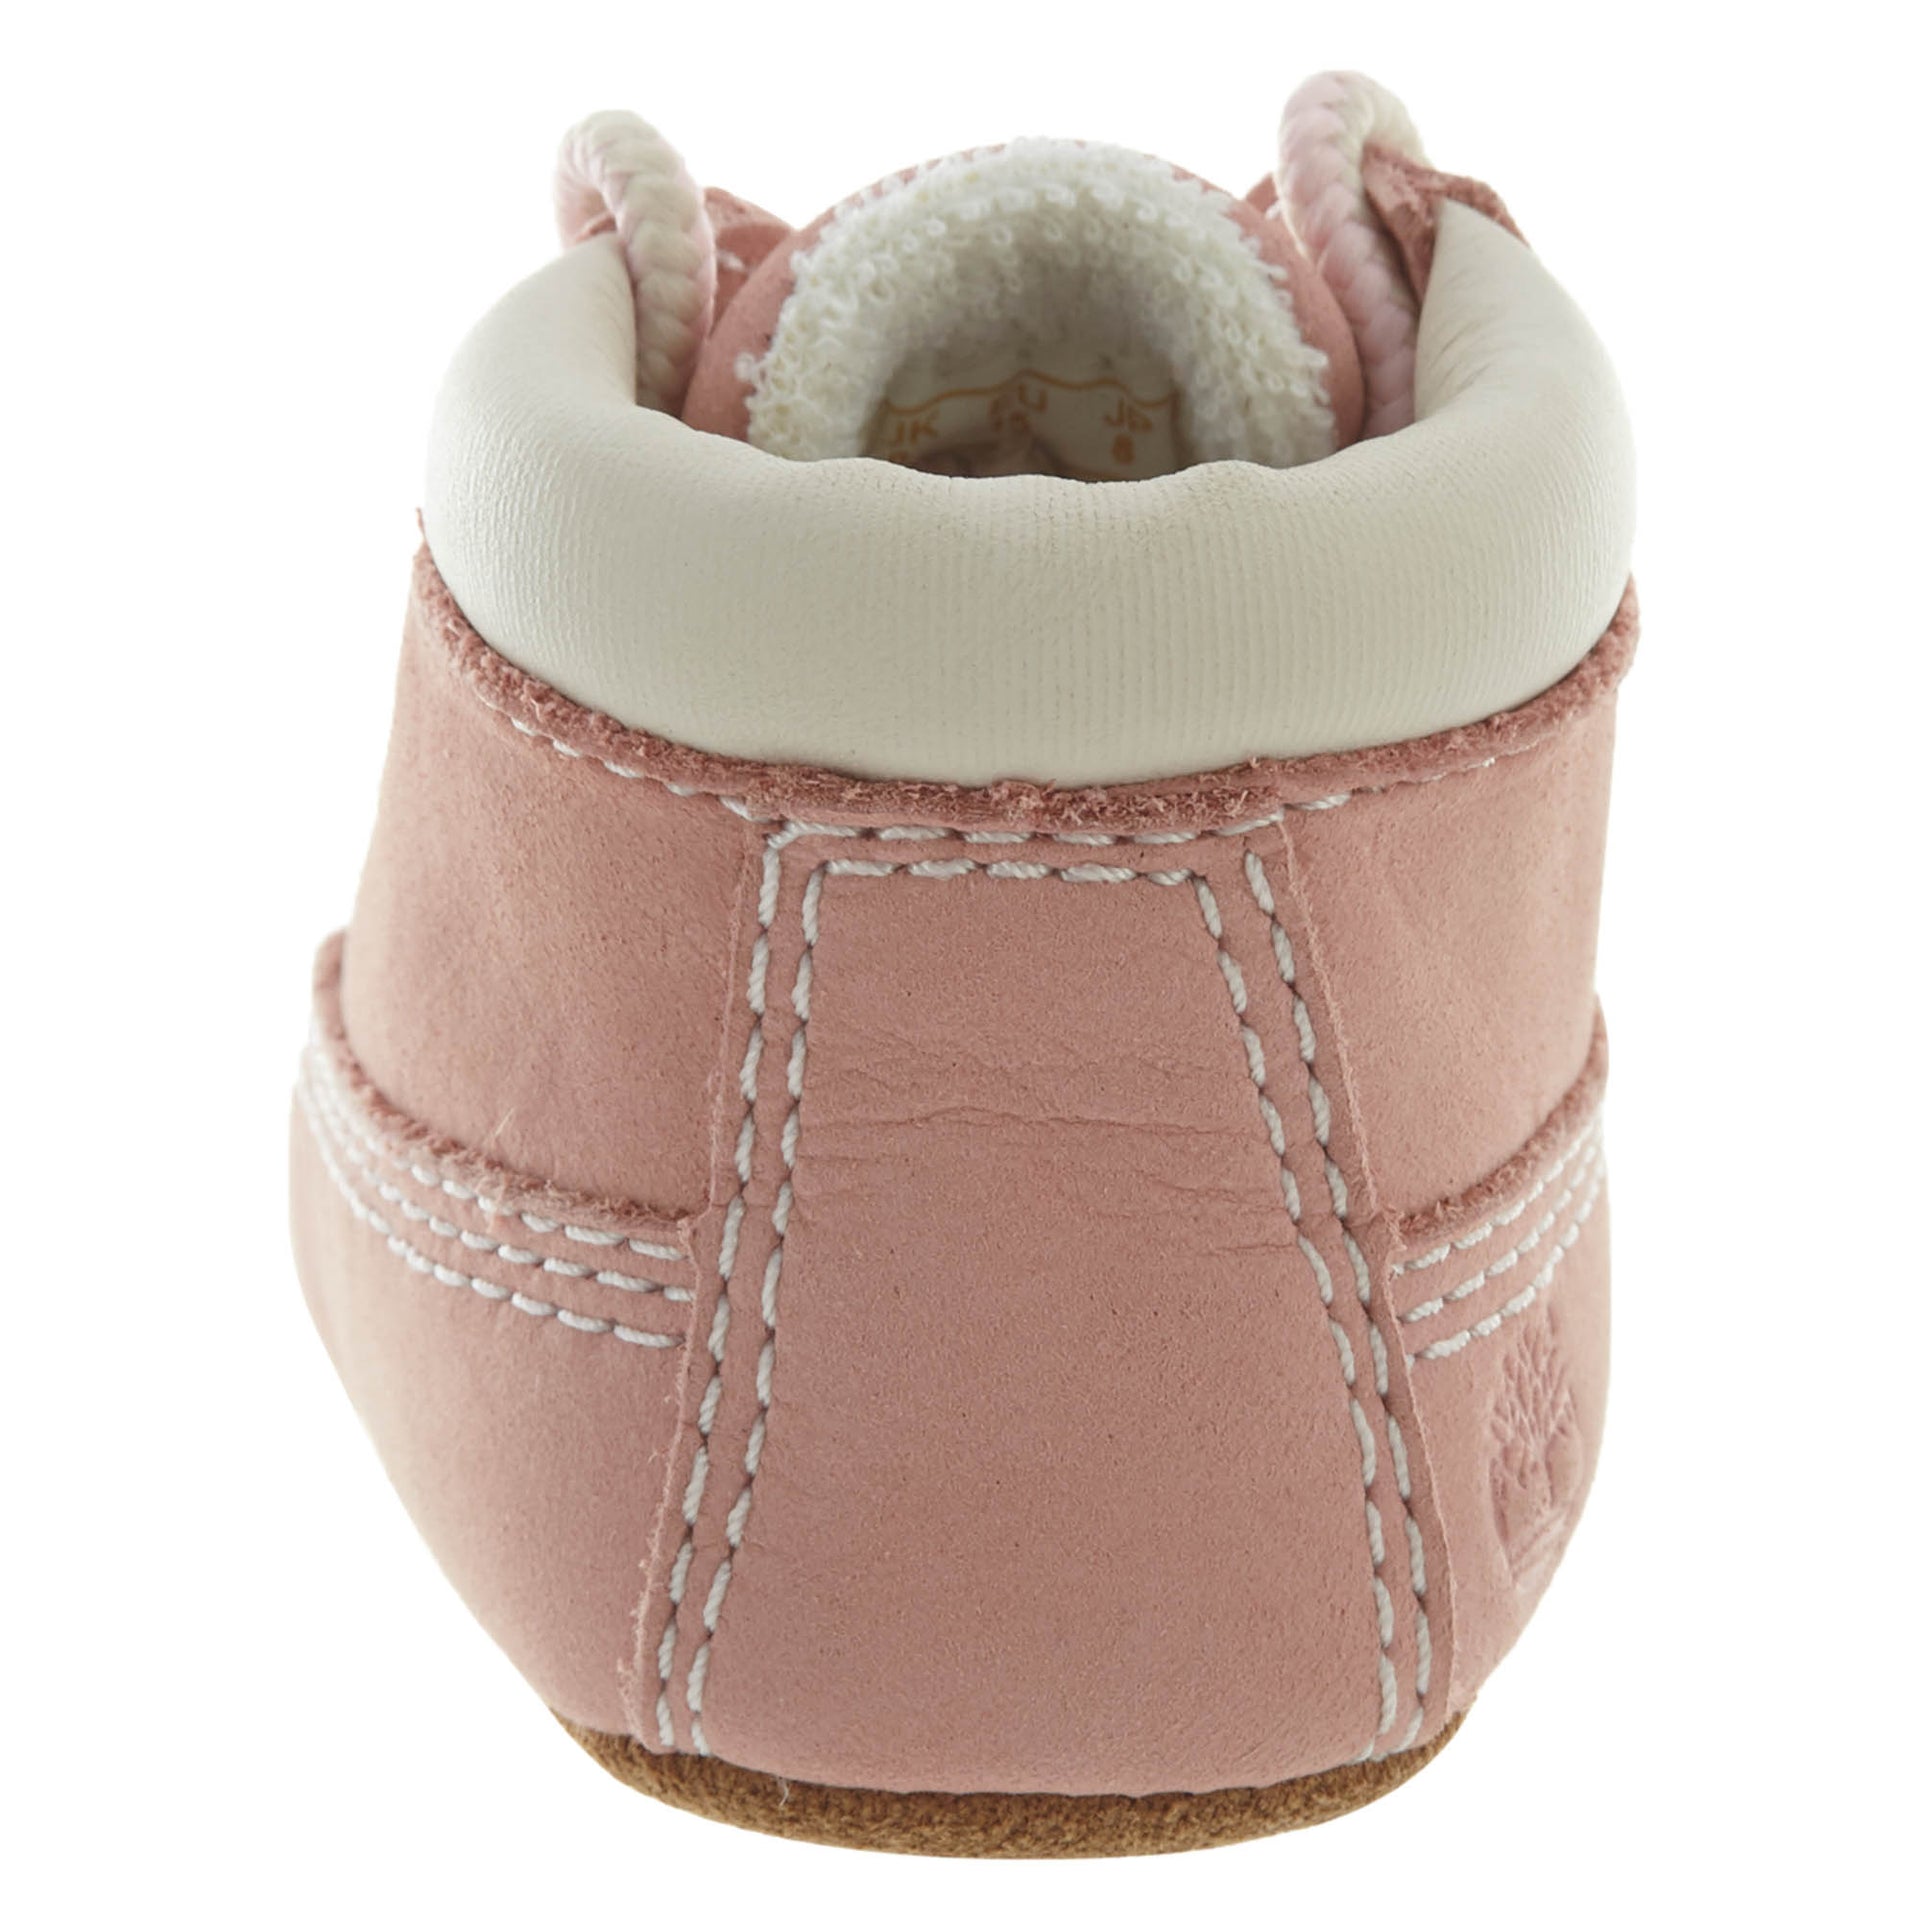 Timberland Bootie W/Hat Crib Style # 10145